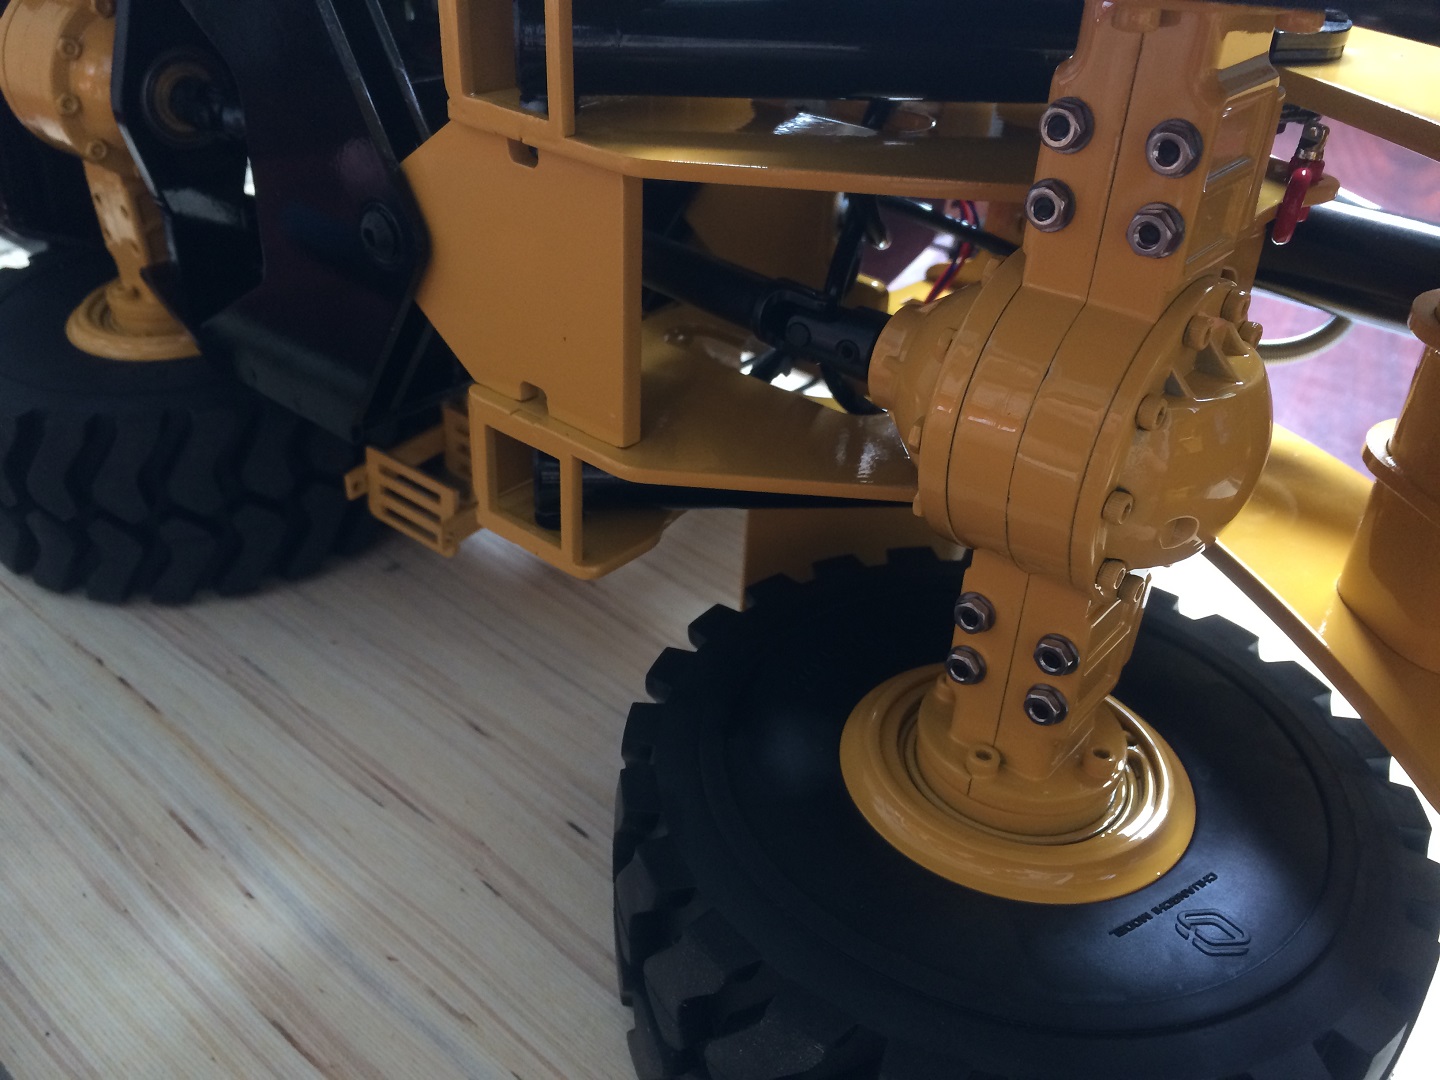 1/14 Metal Hydraulic RC Wheel Loader, Remote Control All-Metal High Quality Like Real Wheel Loader, Professional Hobbyist Models Not Toys, Large Heavy RC Construction Vehicles